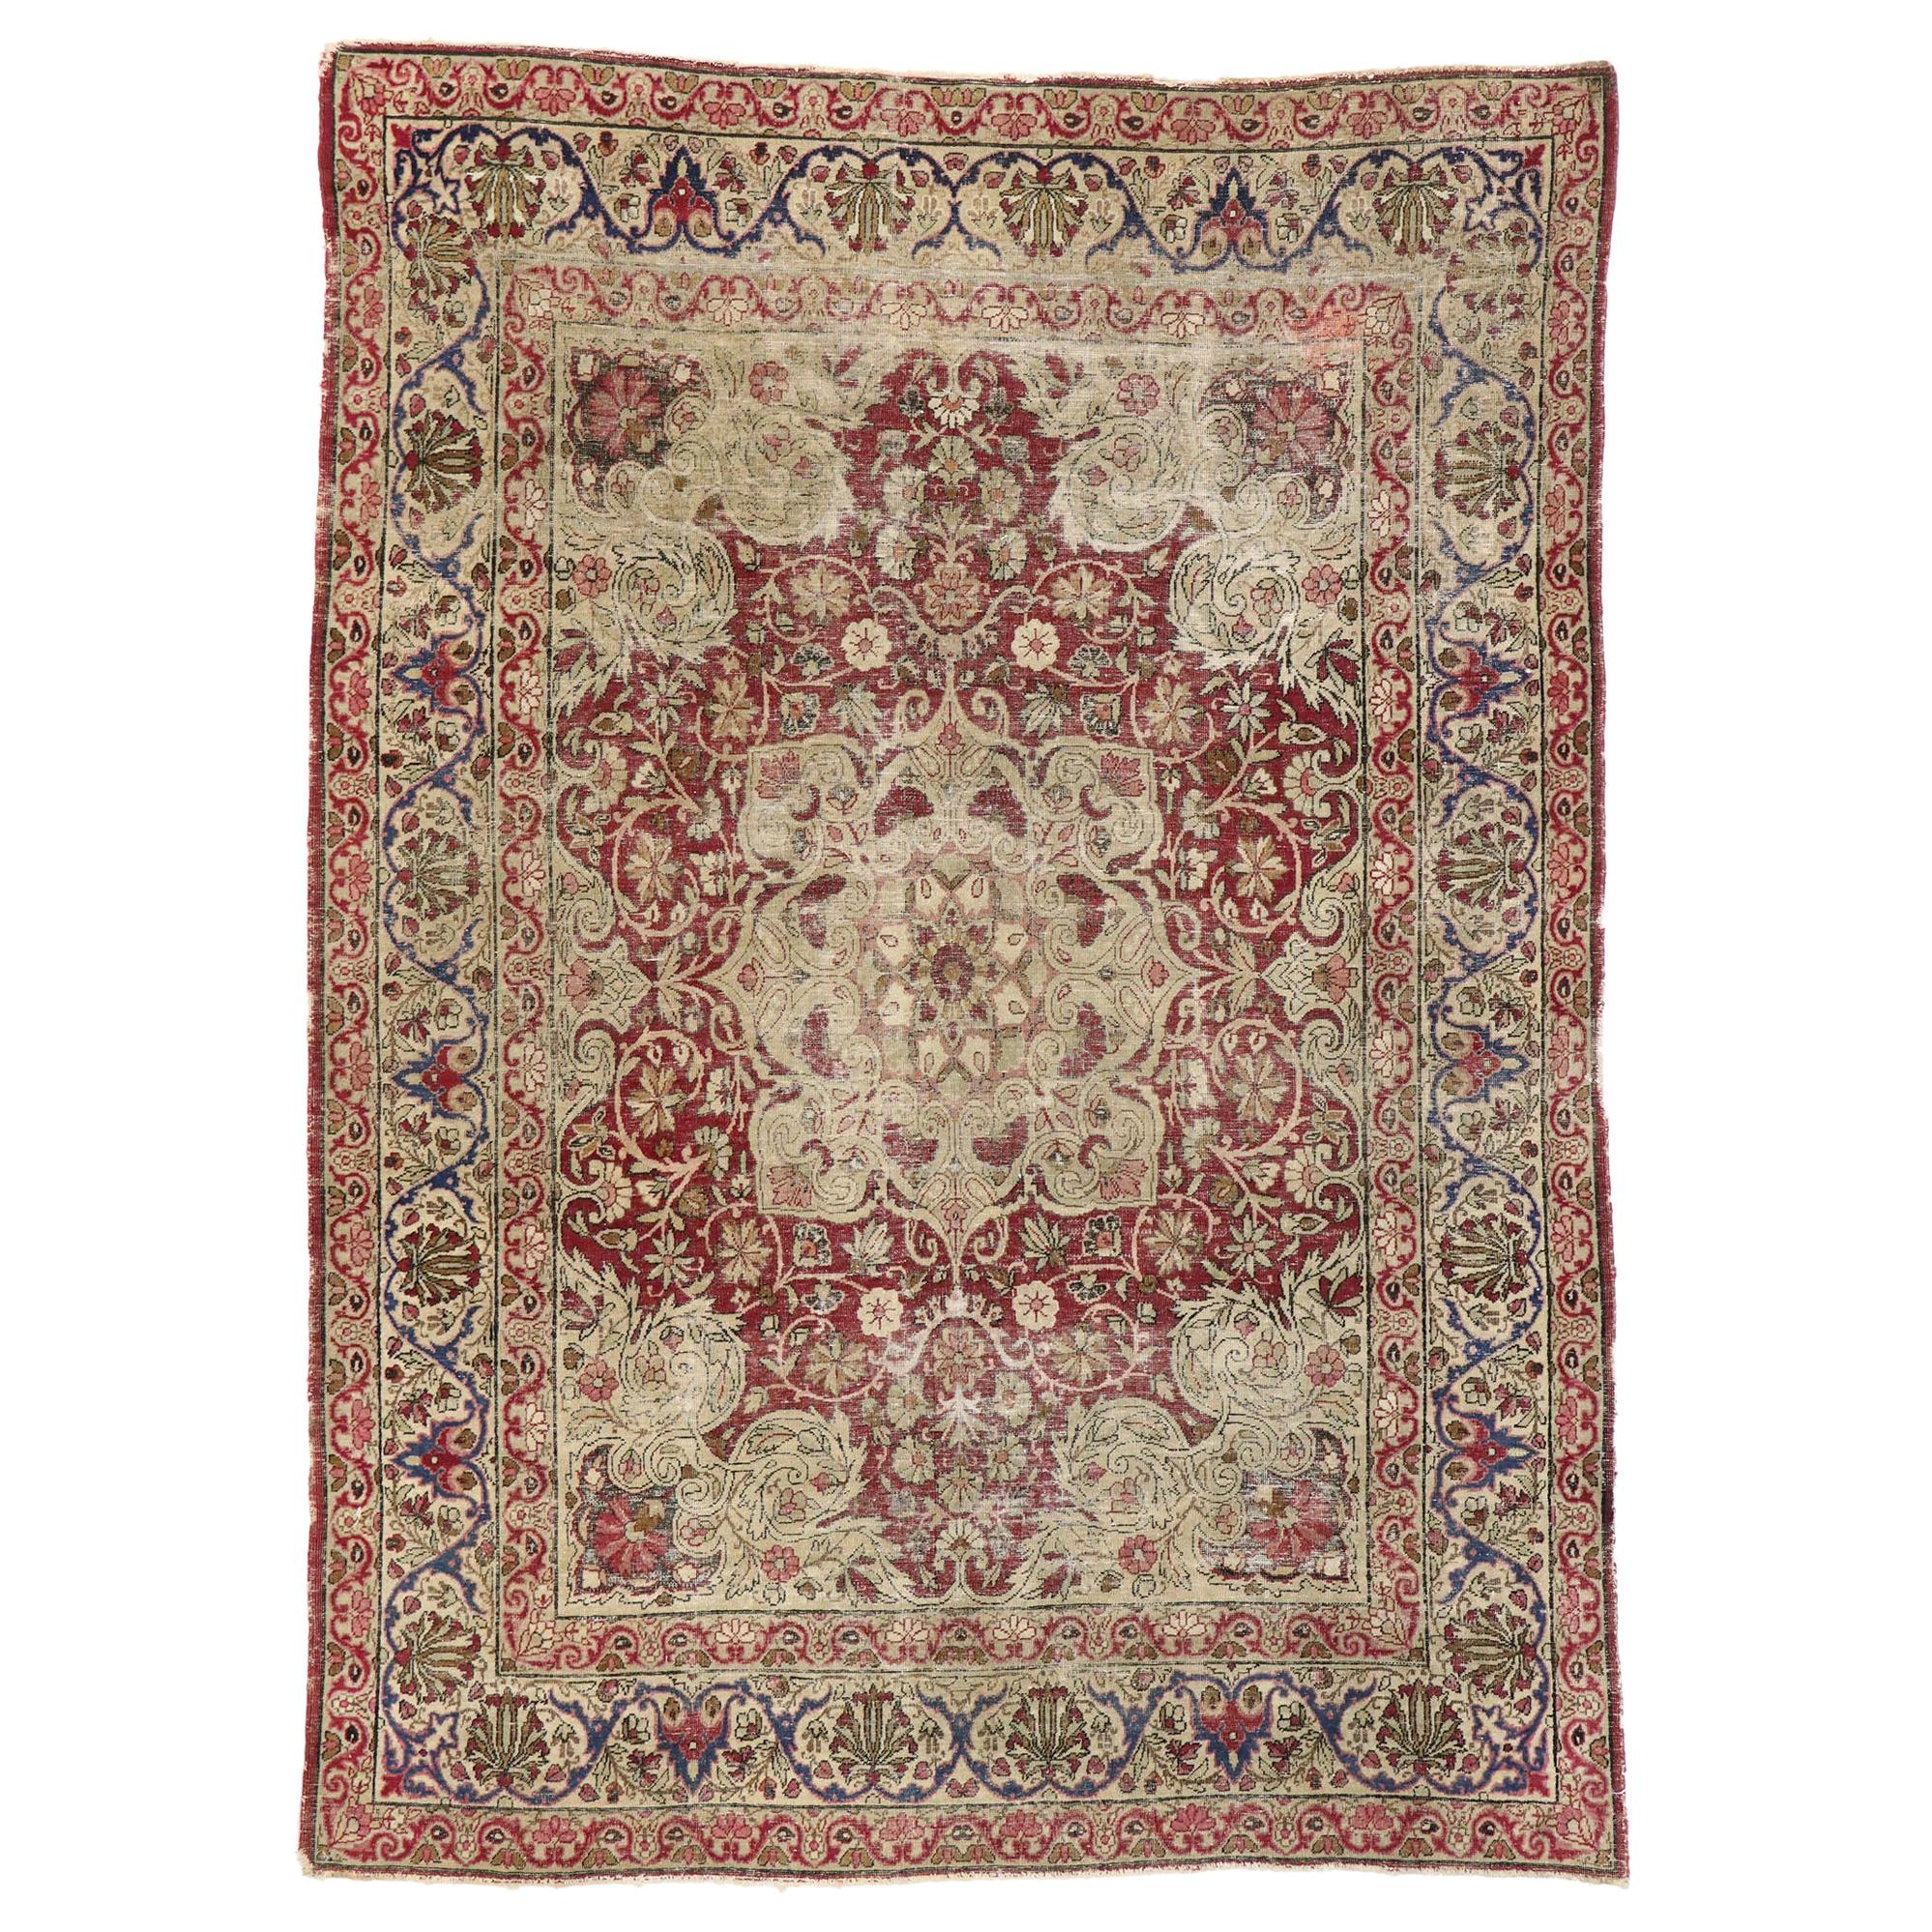 Distressed Antique Persian Kerman Rug with Rustic Old World Victorian Style